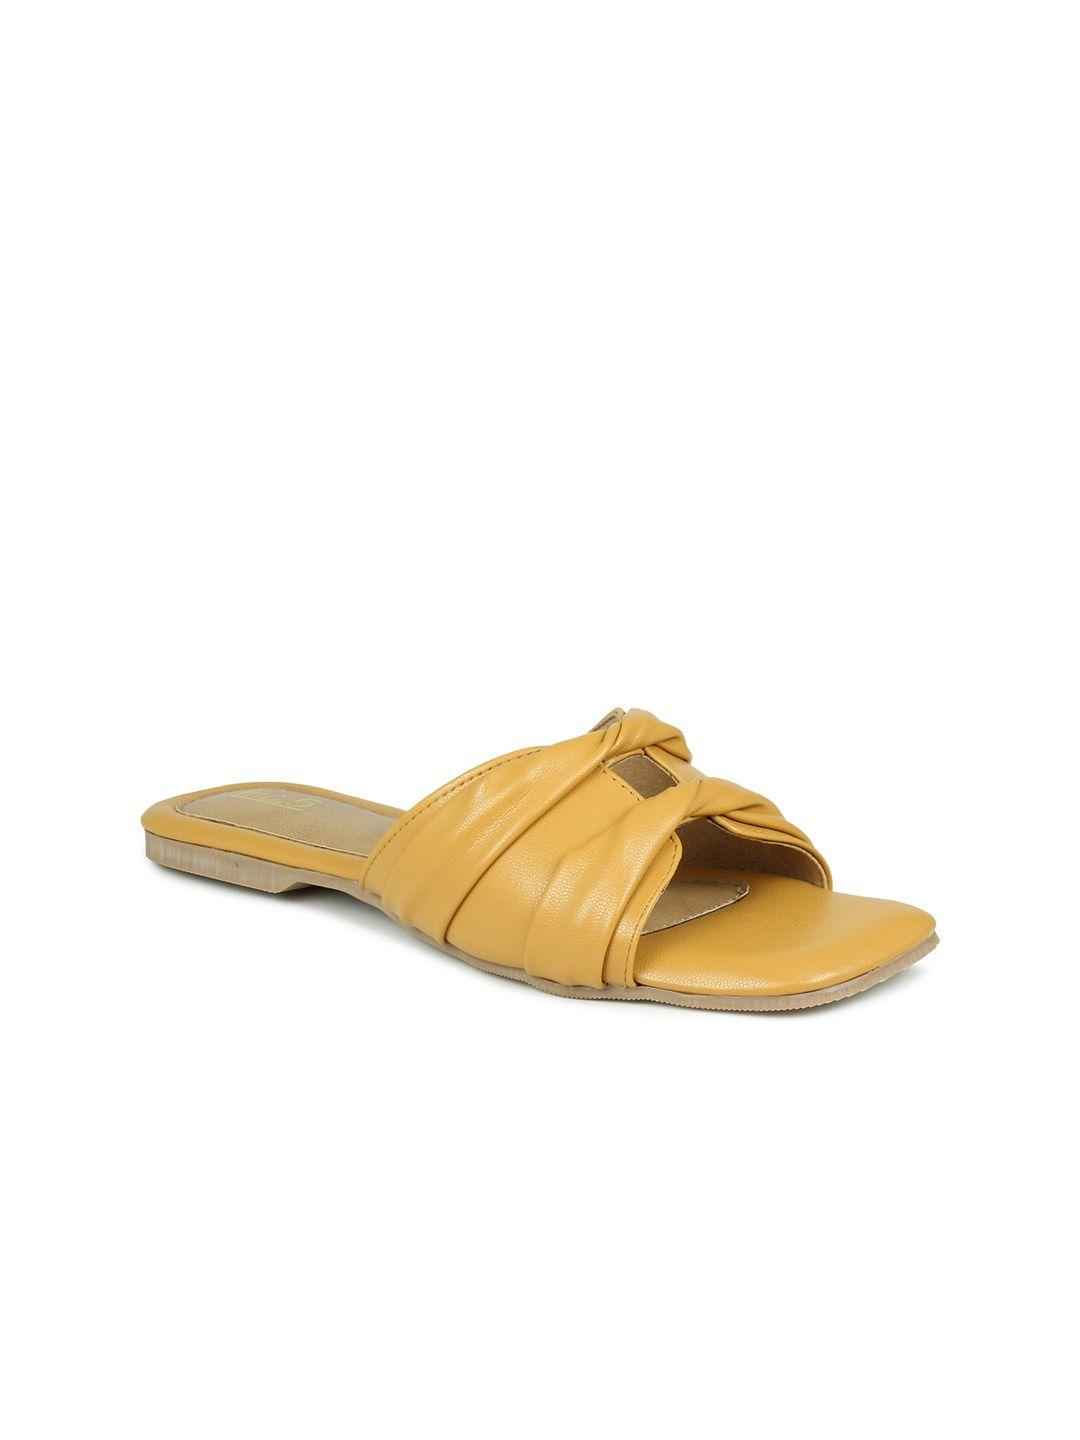 inc 5 women mustard open toe flats with bows